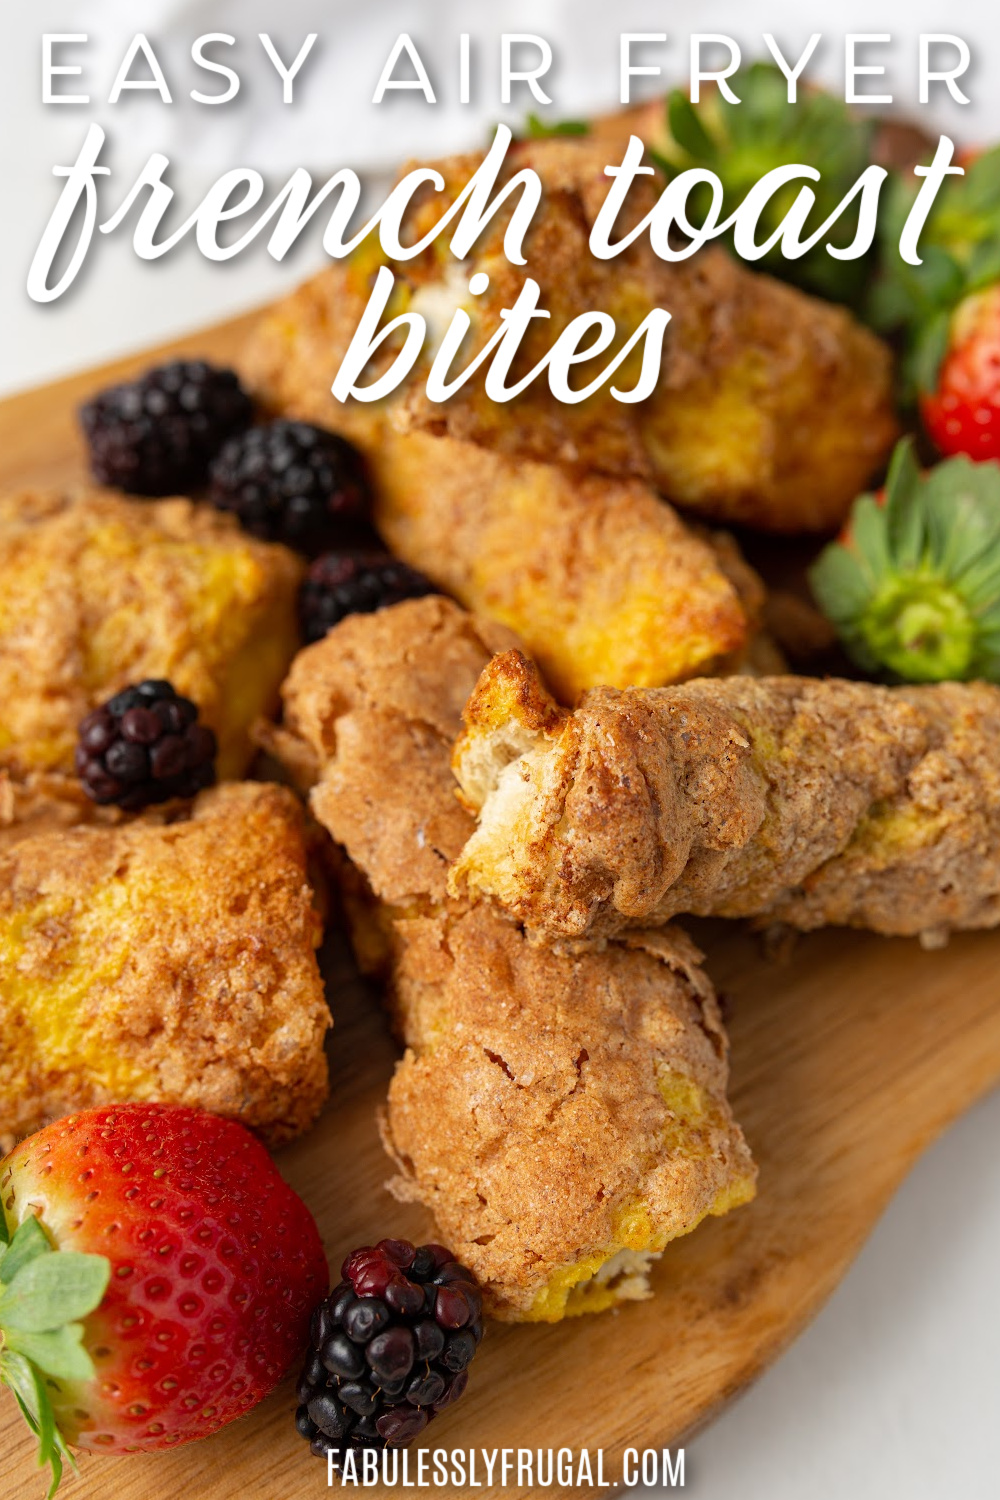 easy air fryer french toast bites